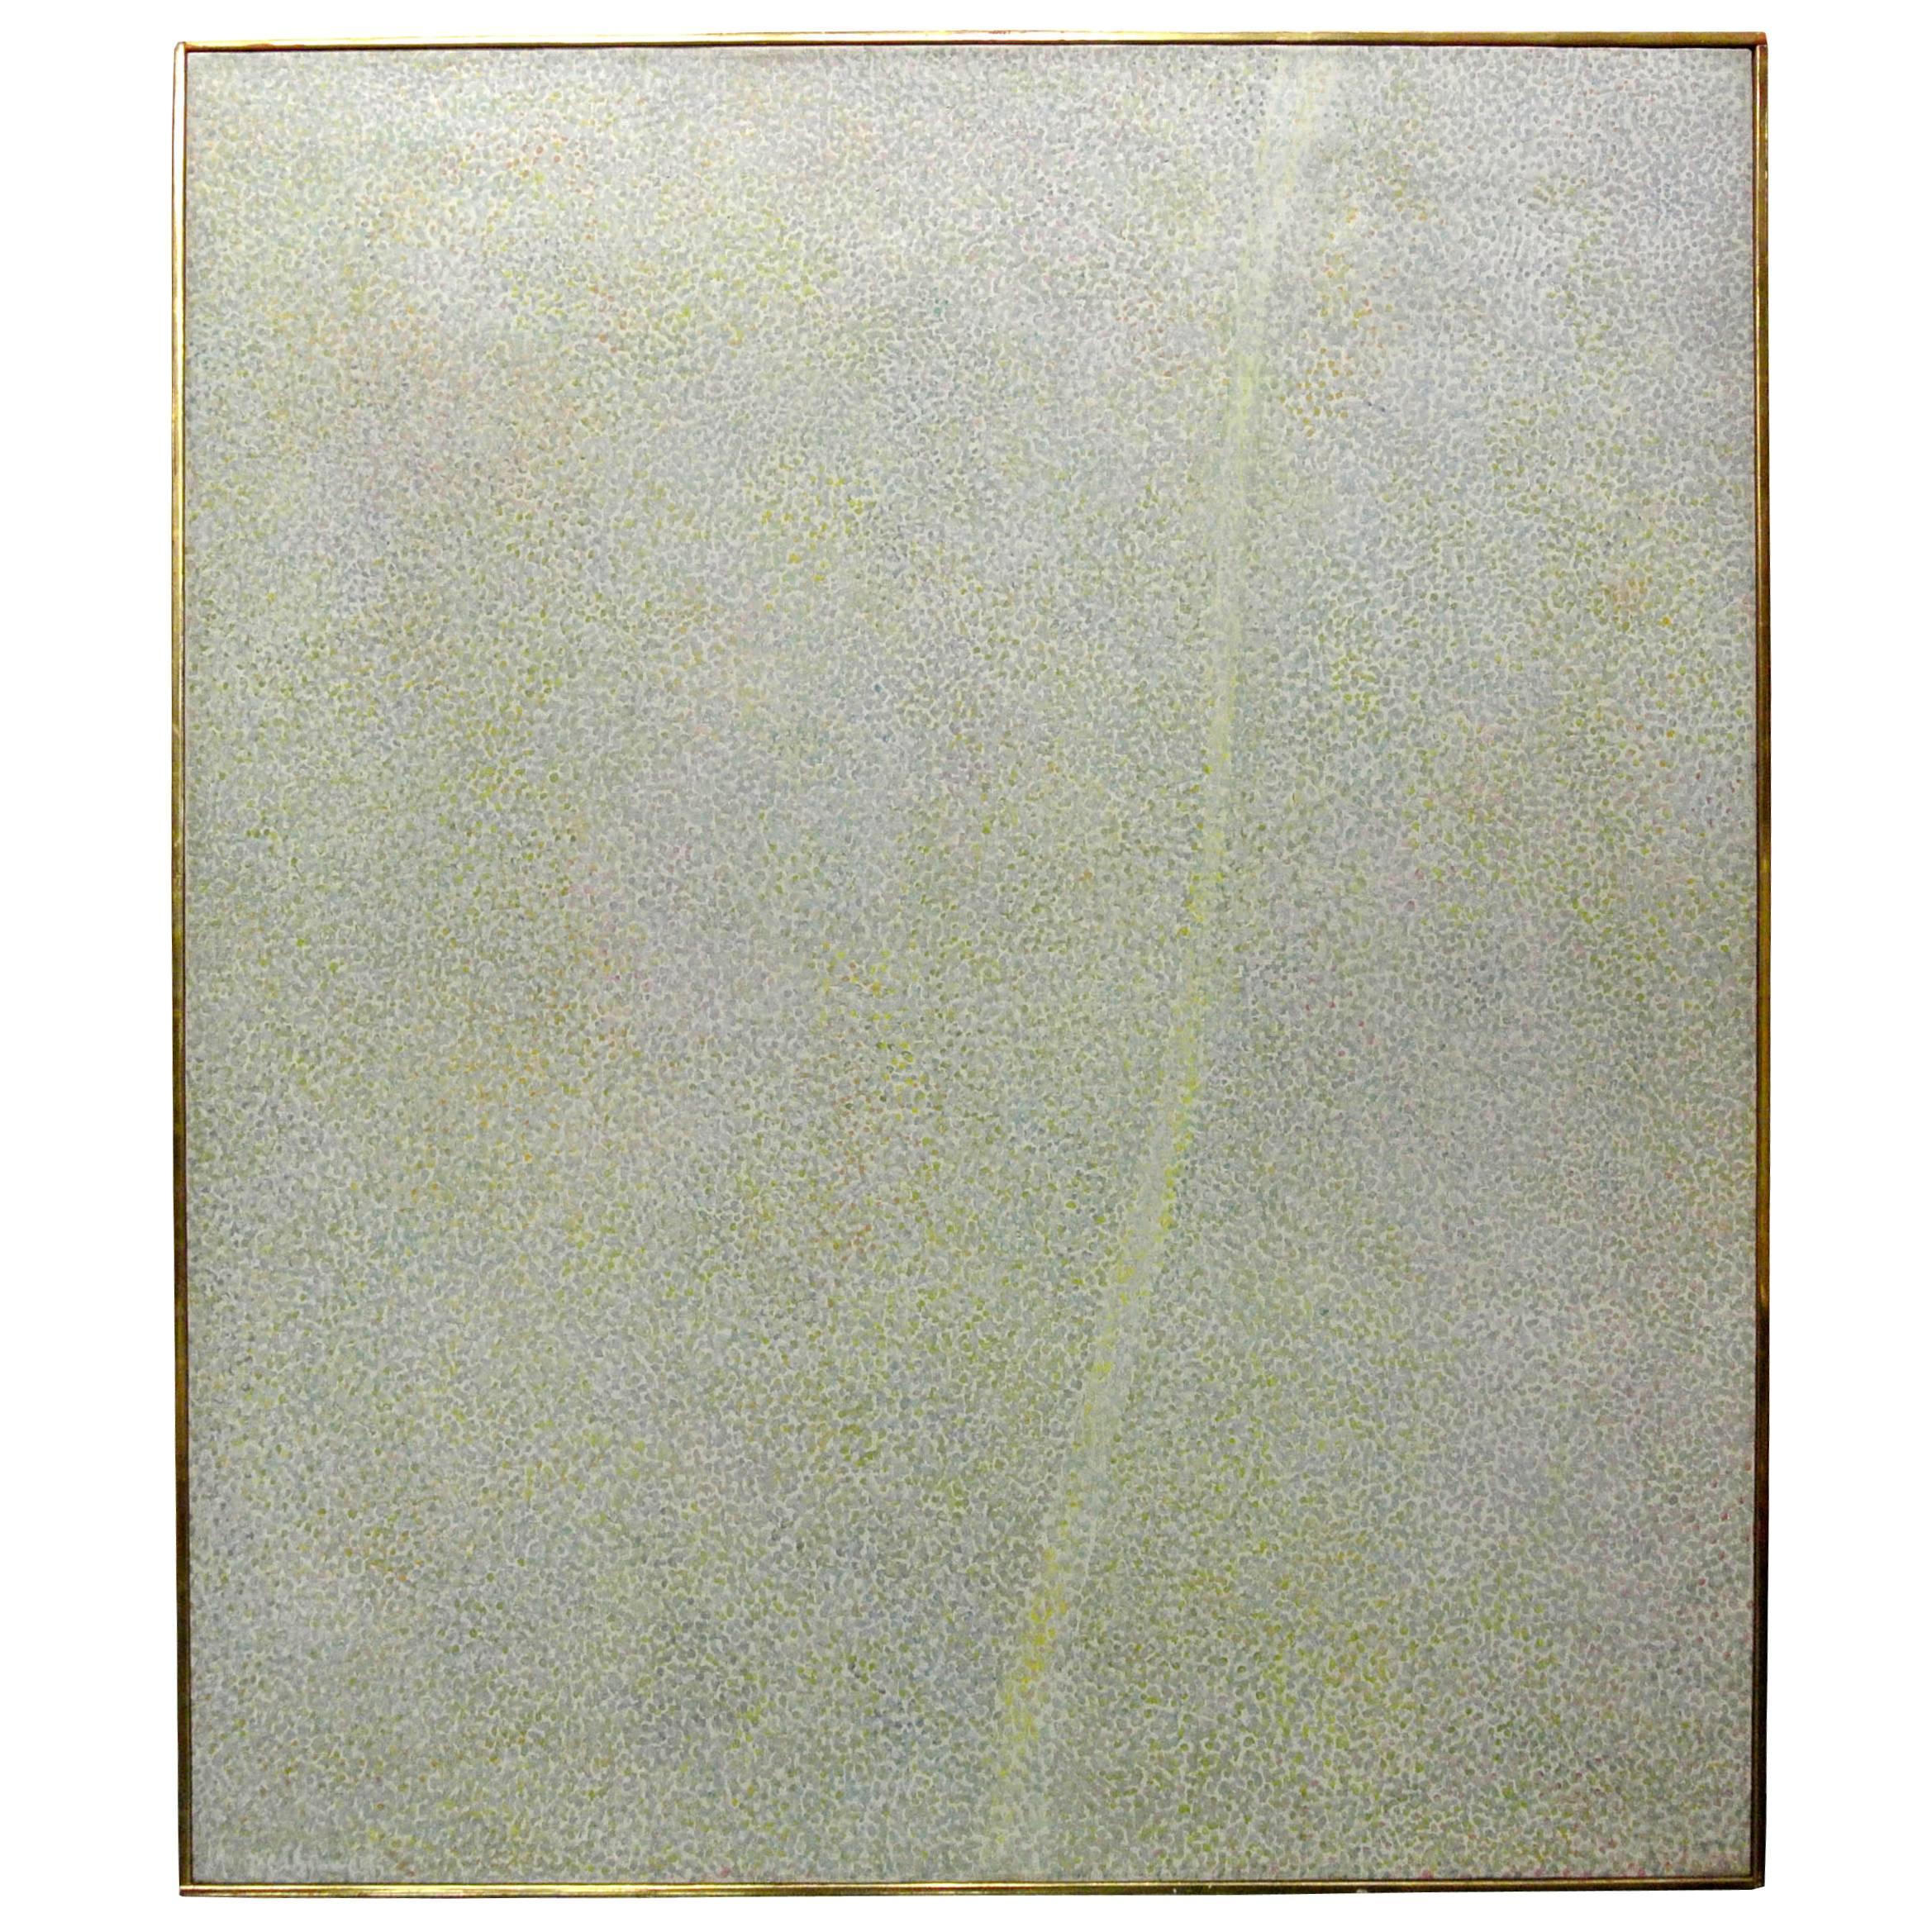 Manfred Schwartz Oil on Canvas "Pale Green Rivulet, " Etretat 1963 Abstract MCM For Sale